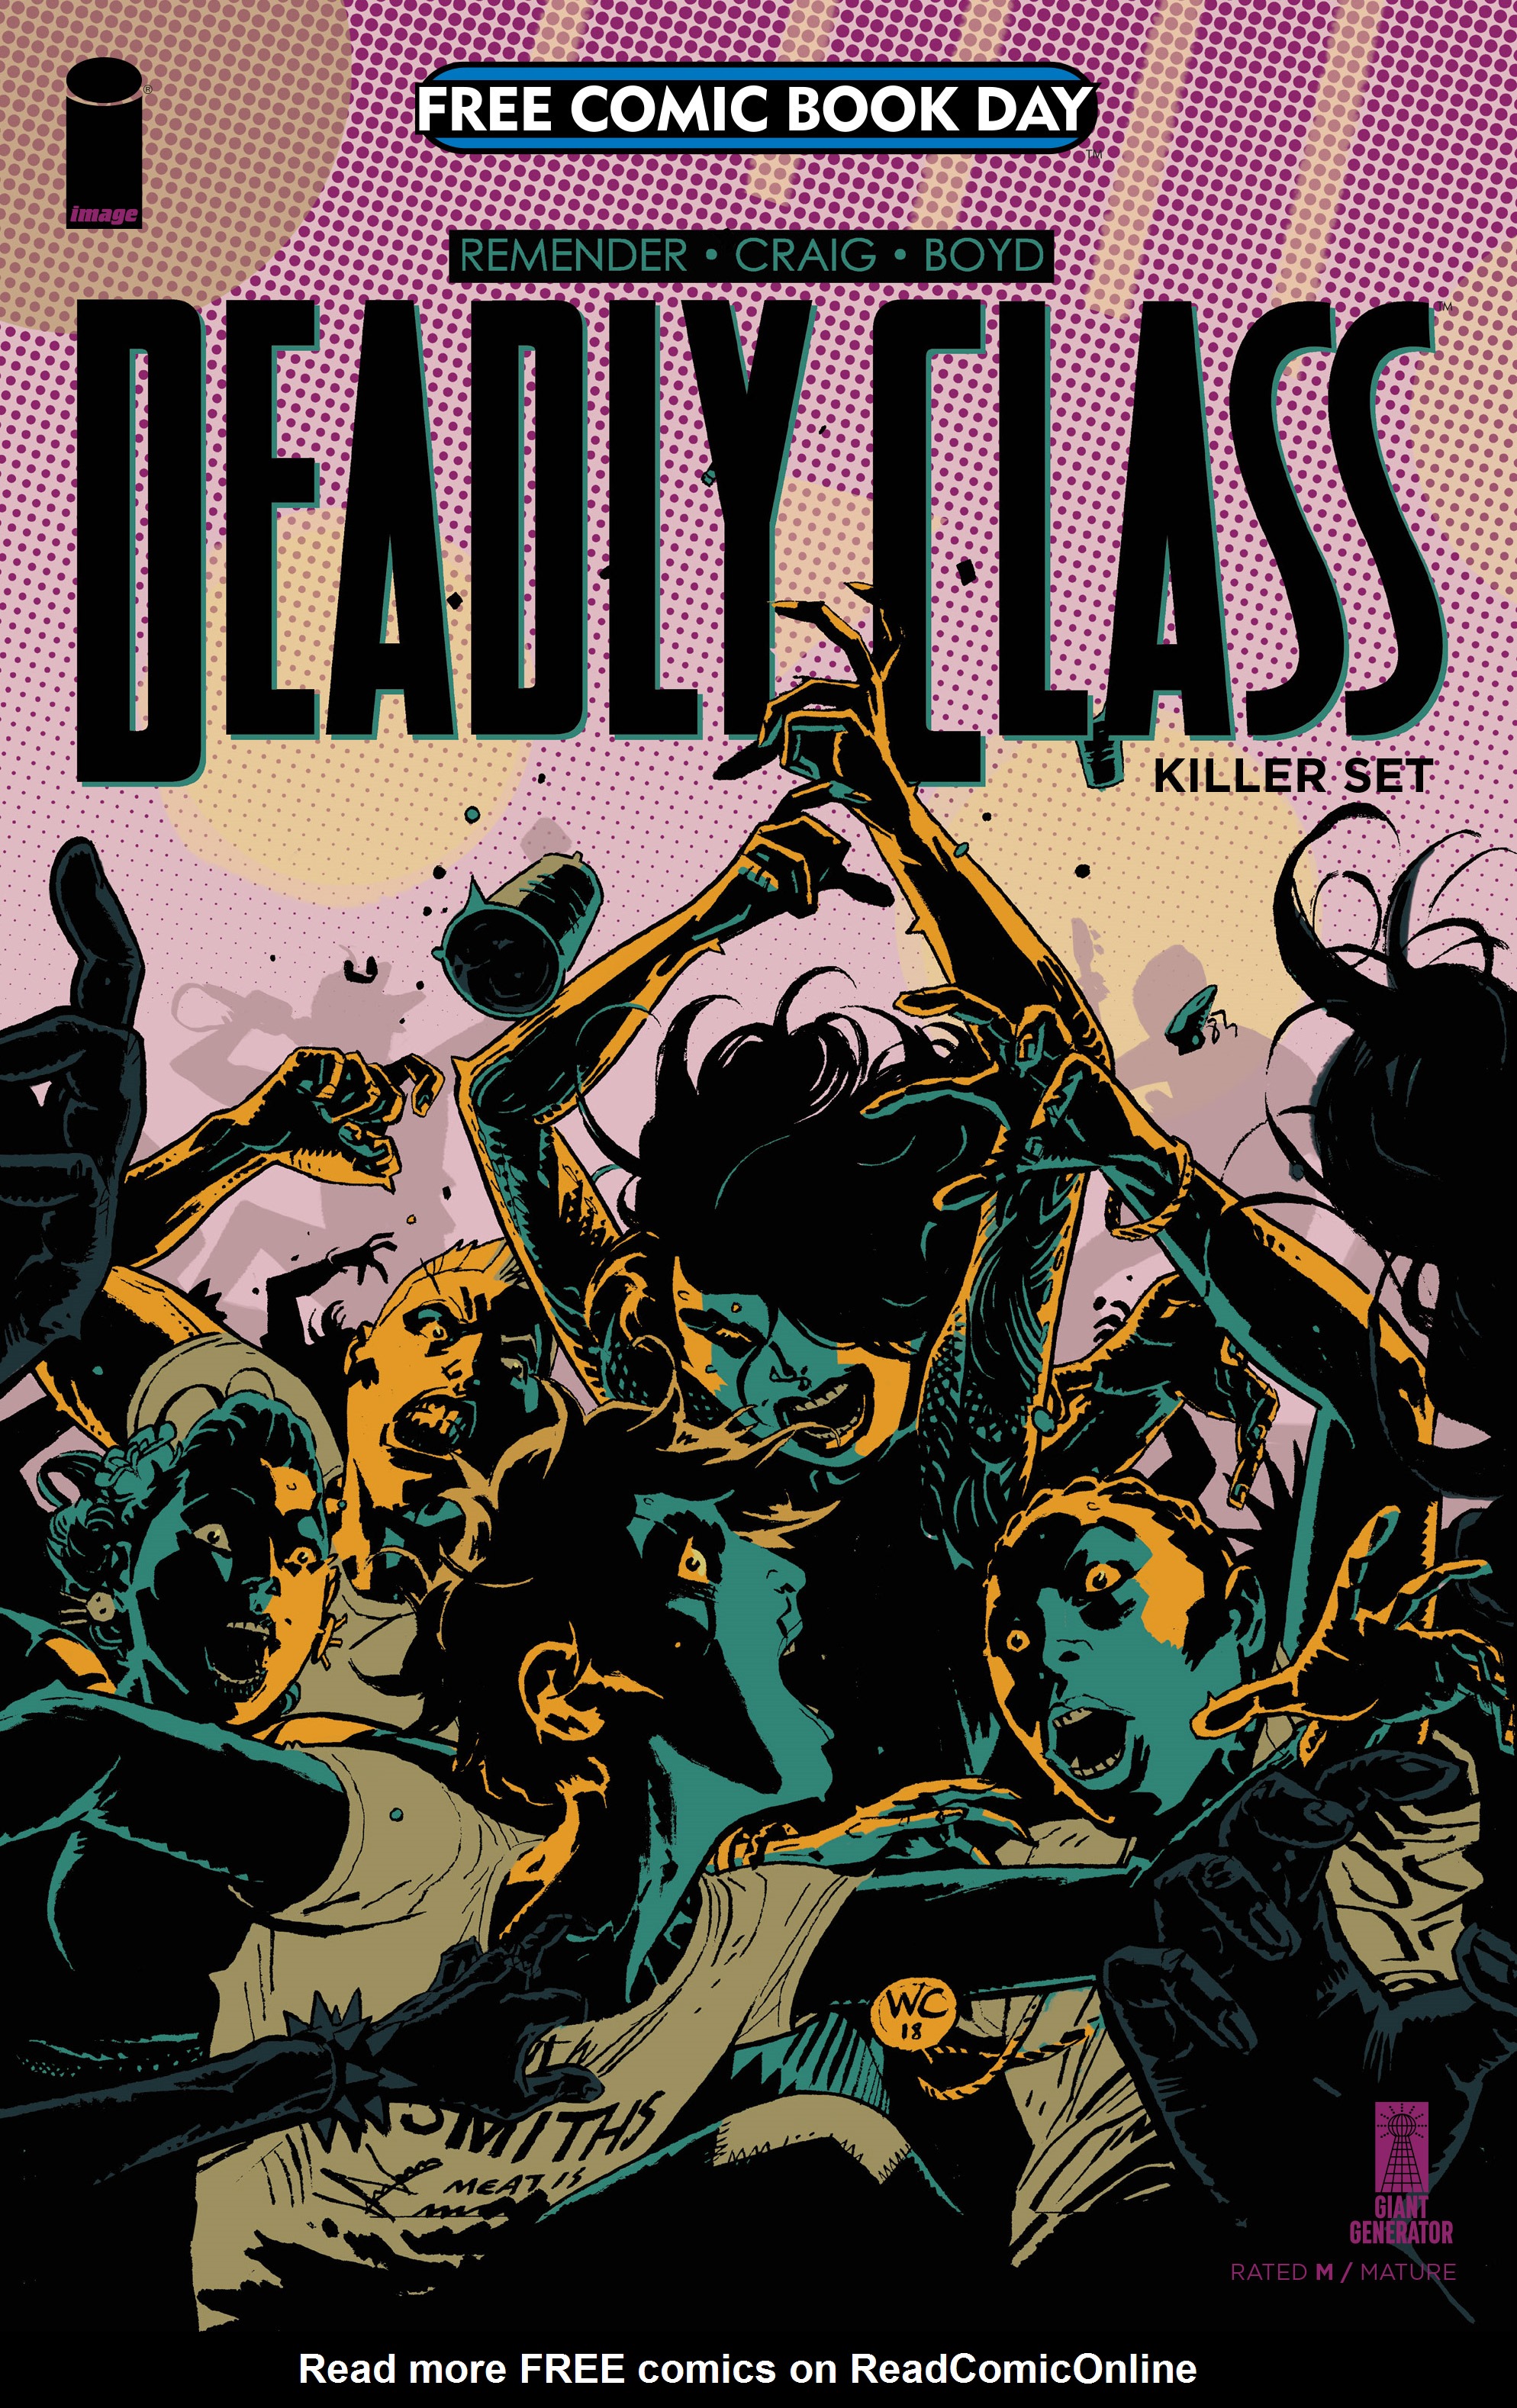 Read online Free Comic Book Day 2019 comic -  Issue # Deadly Class - Killer Set - 1